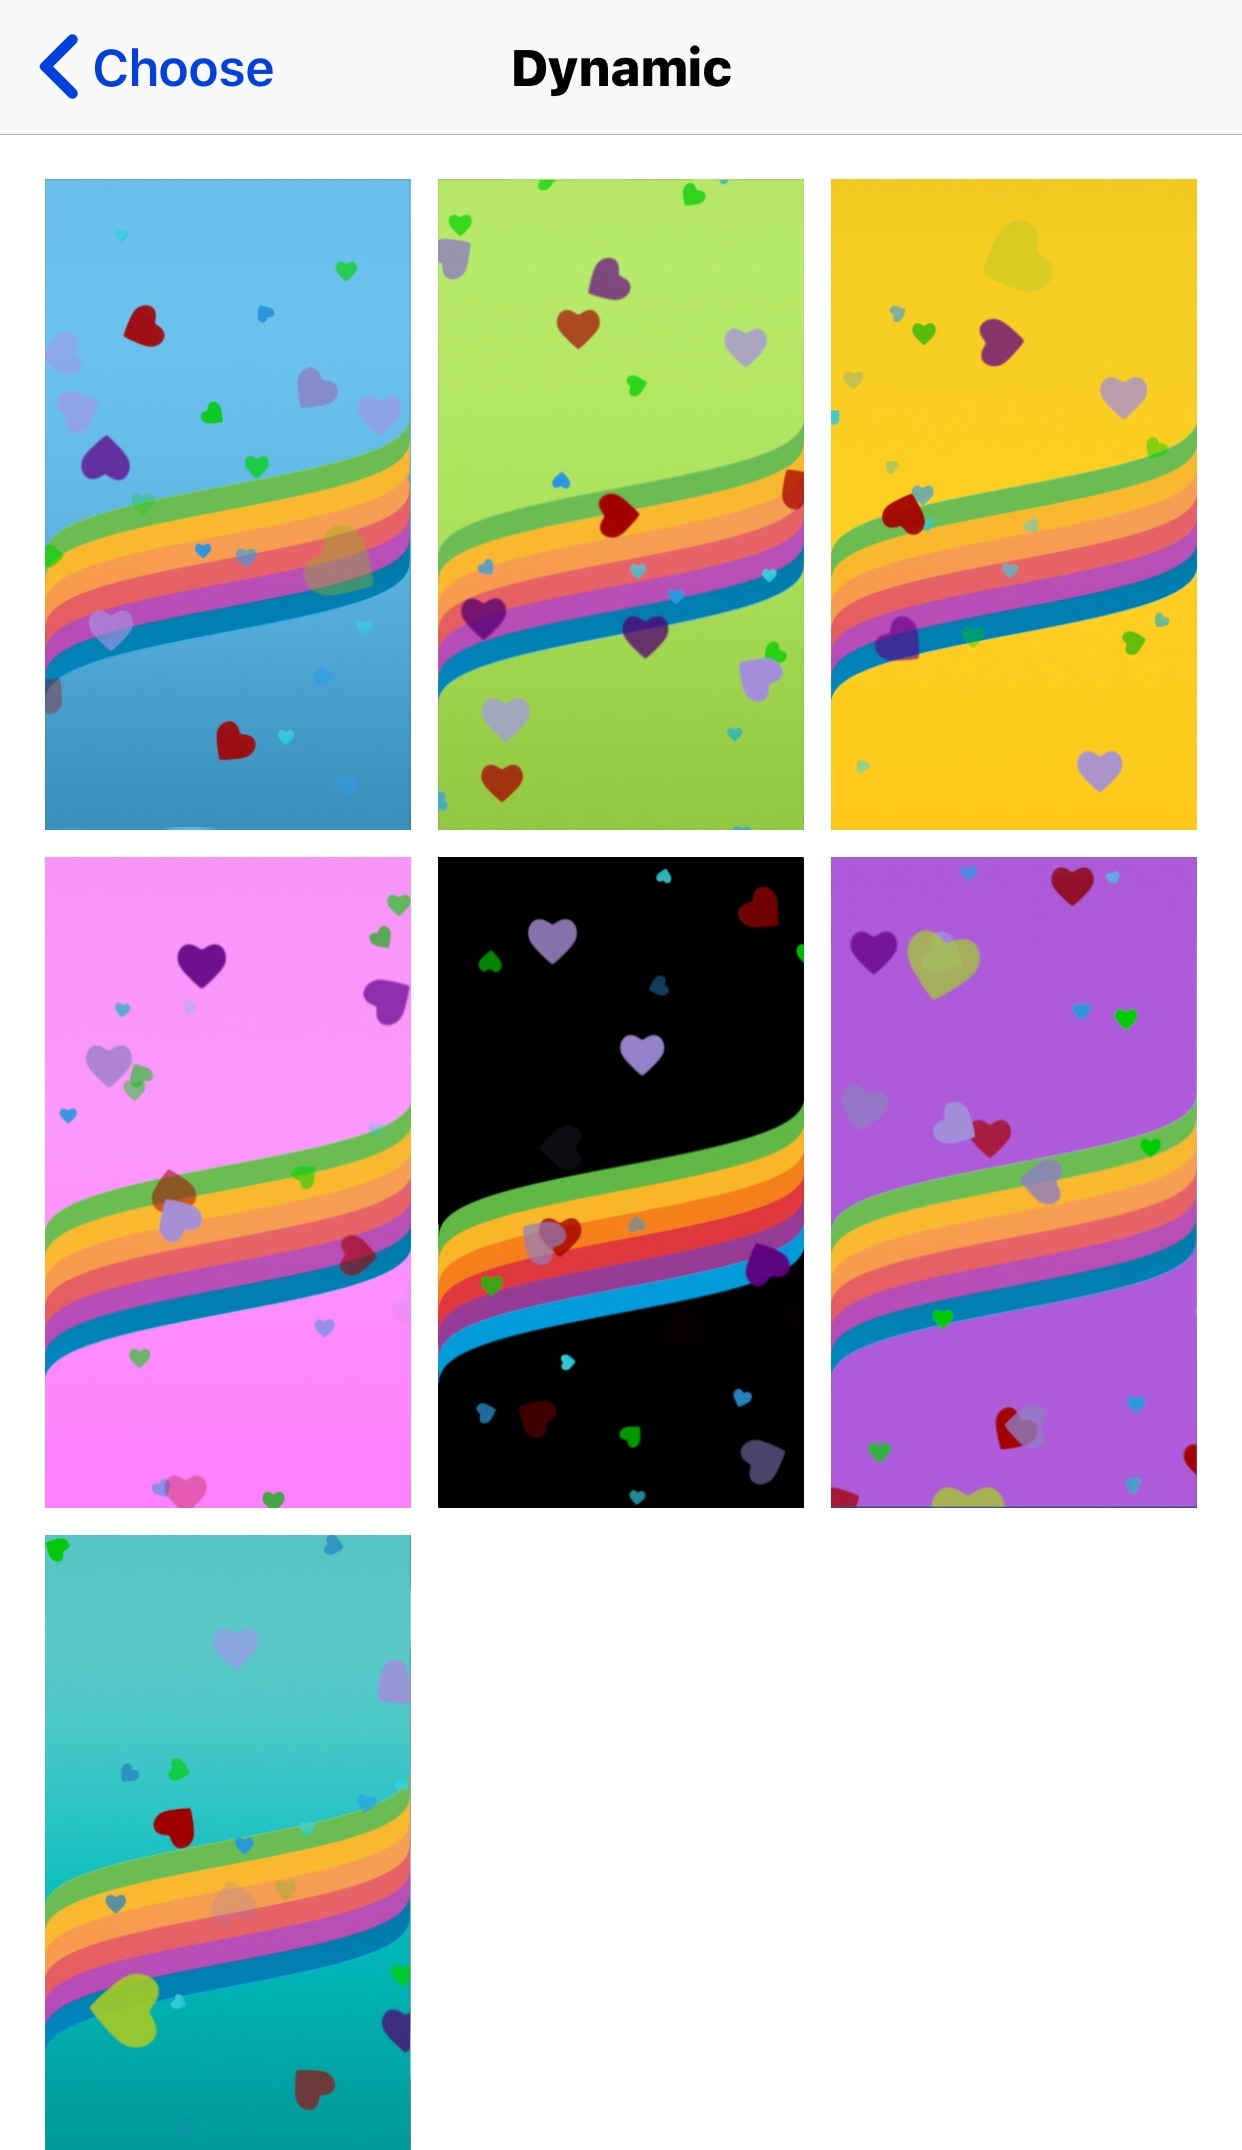 Like Rainbows and Hearts? You may also like These Dynamic Wallpapers for Jailbroken Devices